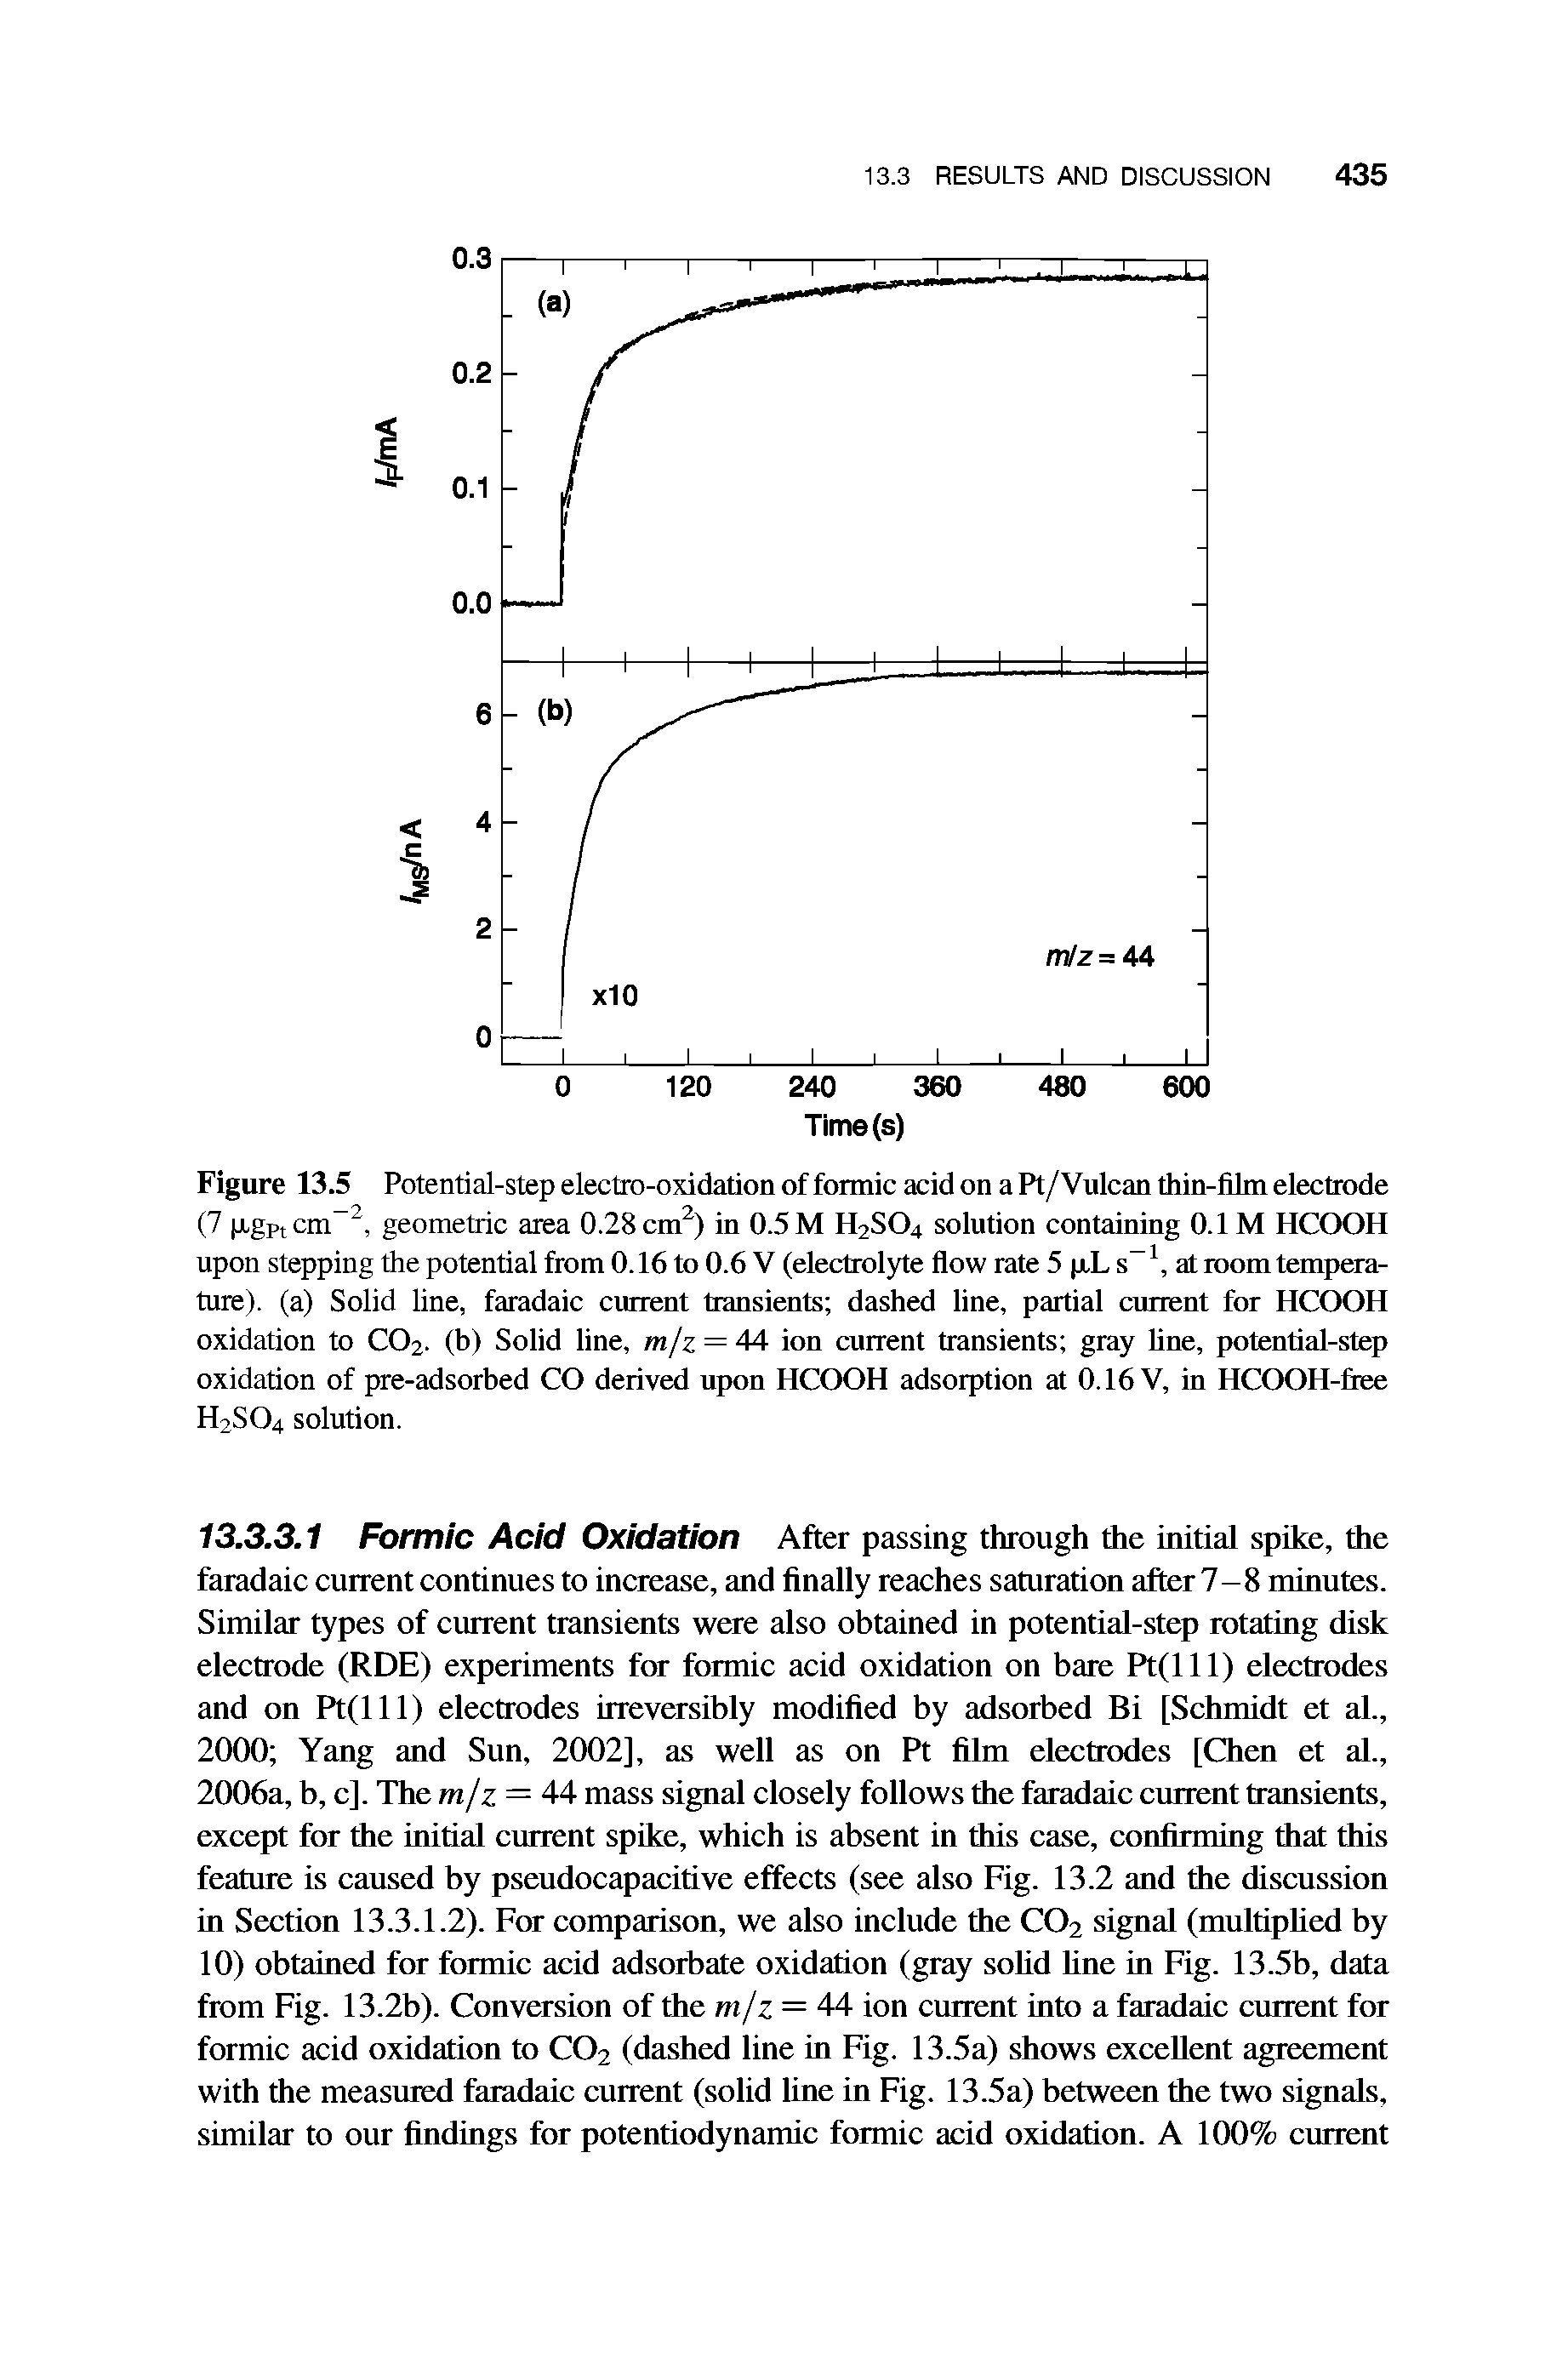 Figure 13.5 Potential-step electro-oxidation of formic acid on a Pt/Vulcan thin-film electrode (7 p,gptcm, geometric area 0.28 cm ) in 0.5 M H2SO4 solution containing 0.1 M HCOOH upon stepping the potential from 0.16 to 0.6 V (electrol)Te flow rate 5 p,L s at room temperature). (a) Solid line, faradaic current transients dashed line, partial current for HCOOH oxidation to CO2. (b) Solid line, m/z = 44 ion current transients gray line, potential-step oxidation of pre-adsorbed CO derived upon HCOOH adsorption at 0.16 V, in HCOOH-ftee H2SO4 solution.